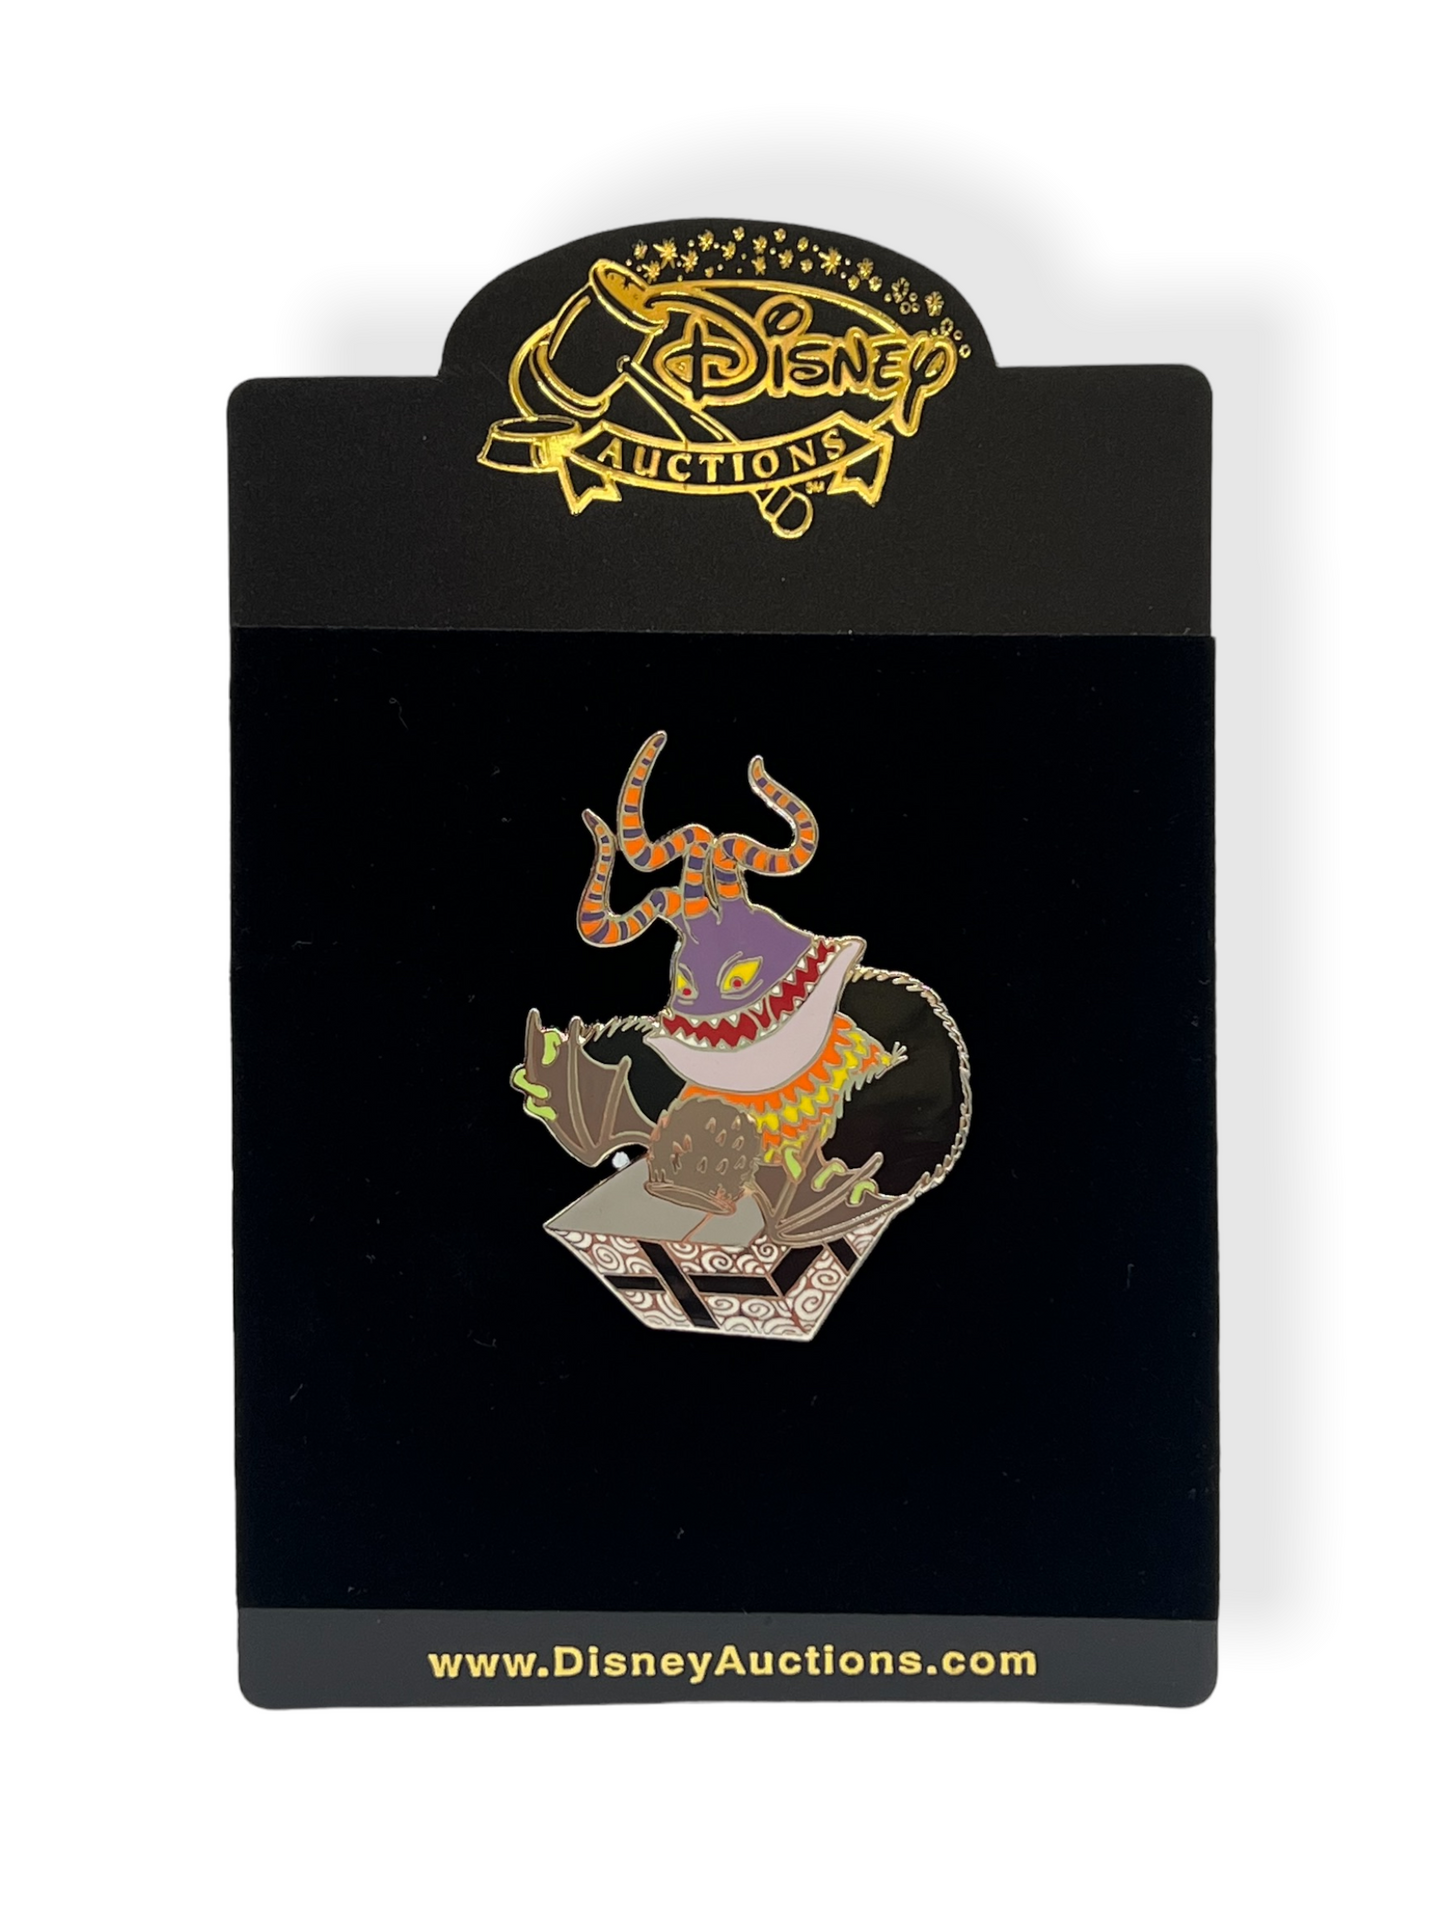 Disney Auctions Nightmare Before Christmas Harley Quinn Pin